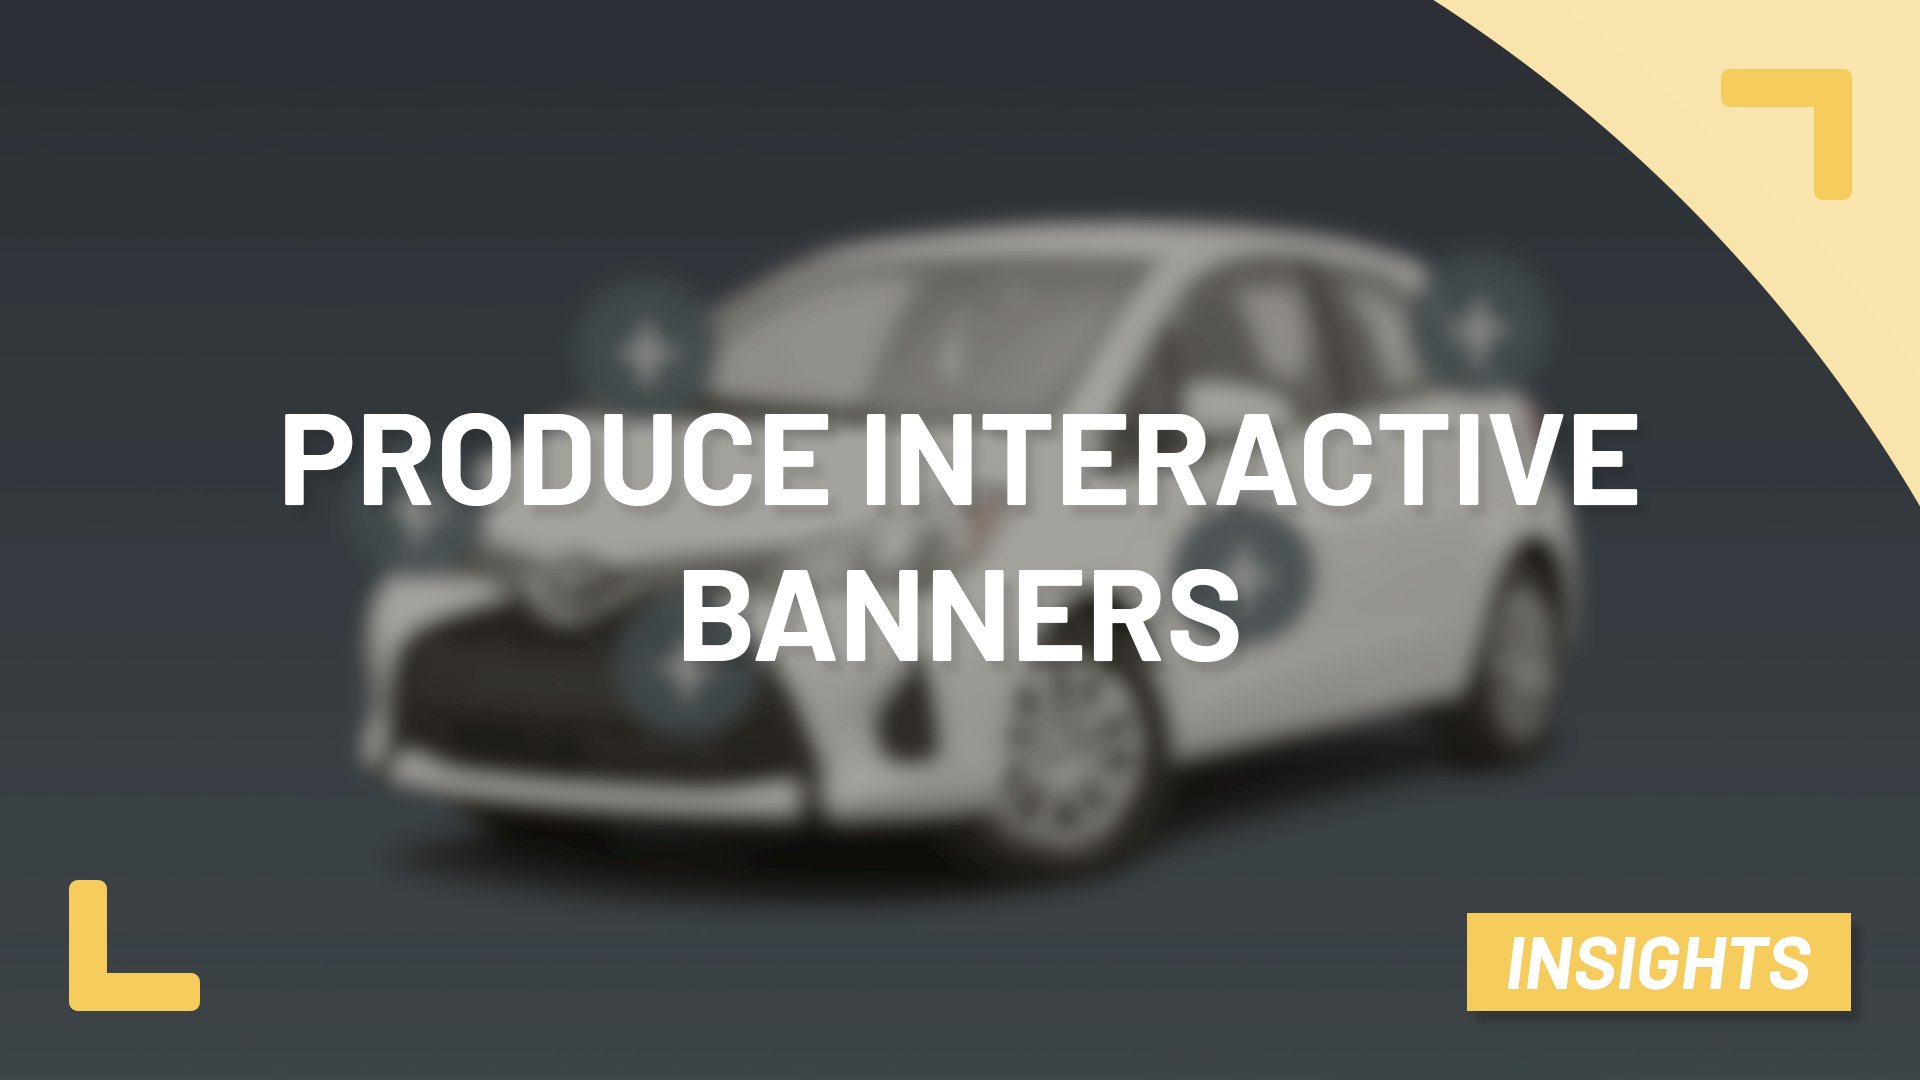 Increase performance with interactive banners - Zuuvi